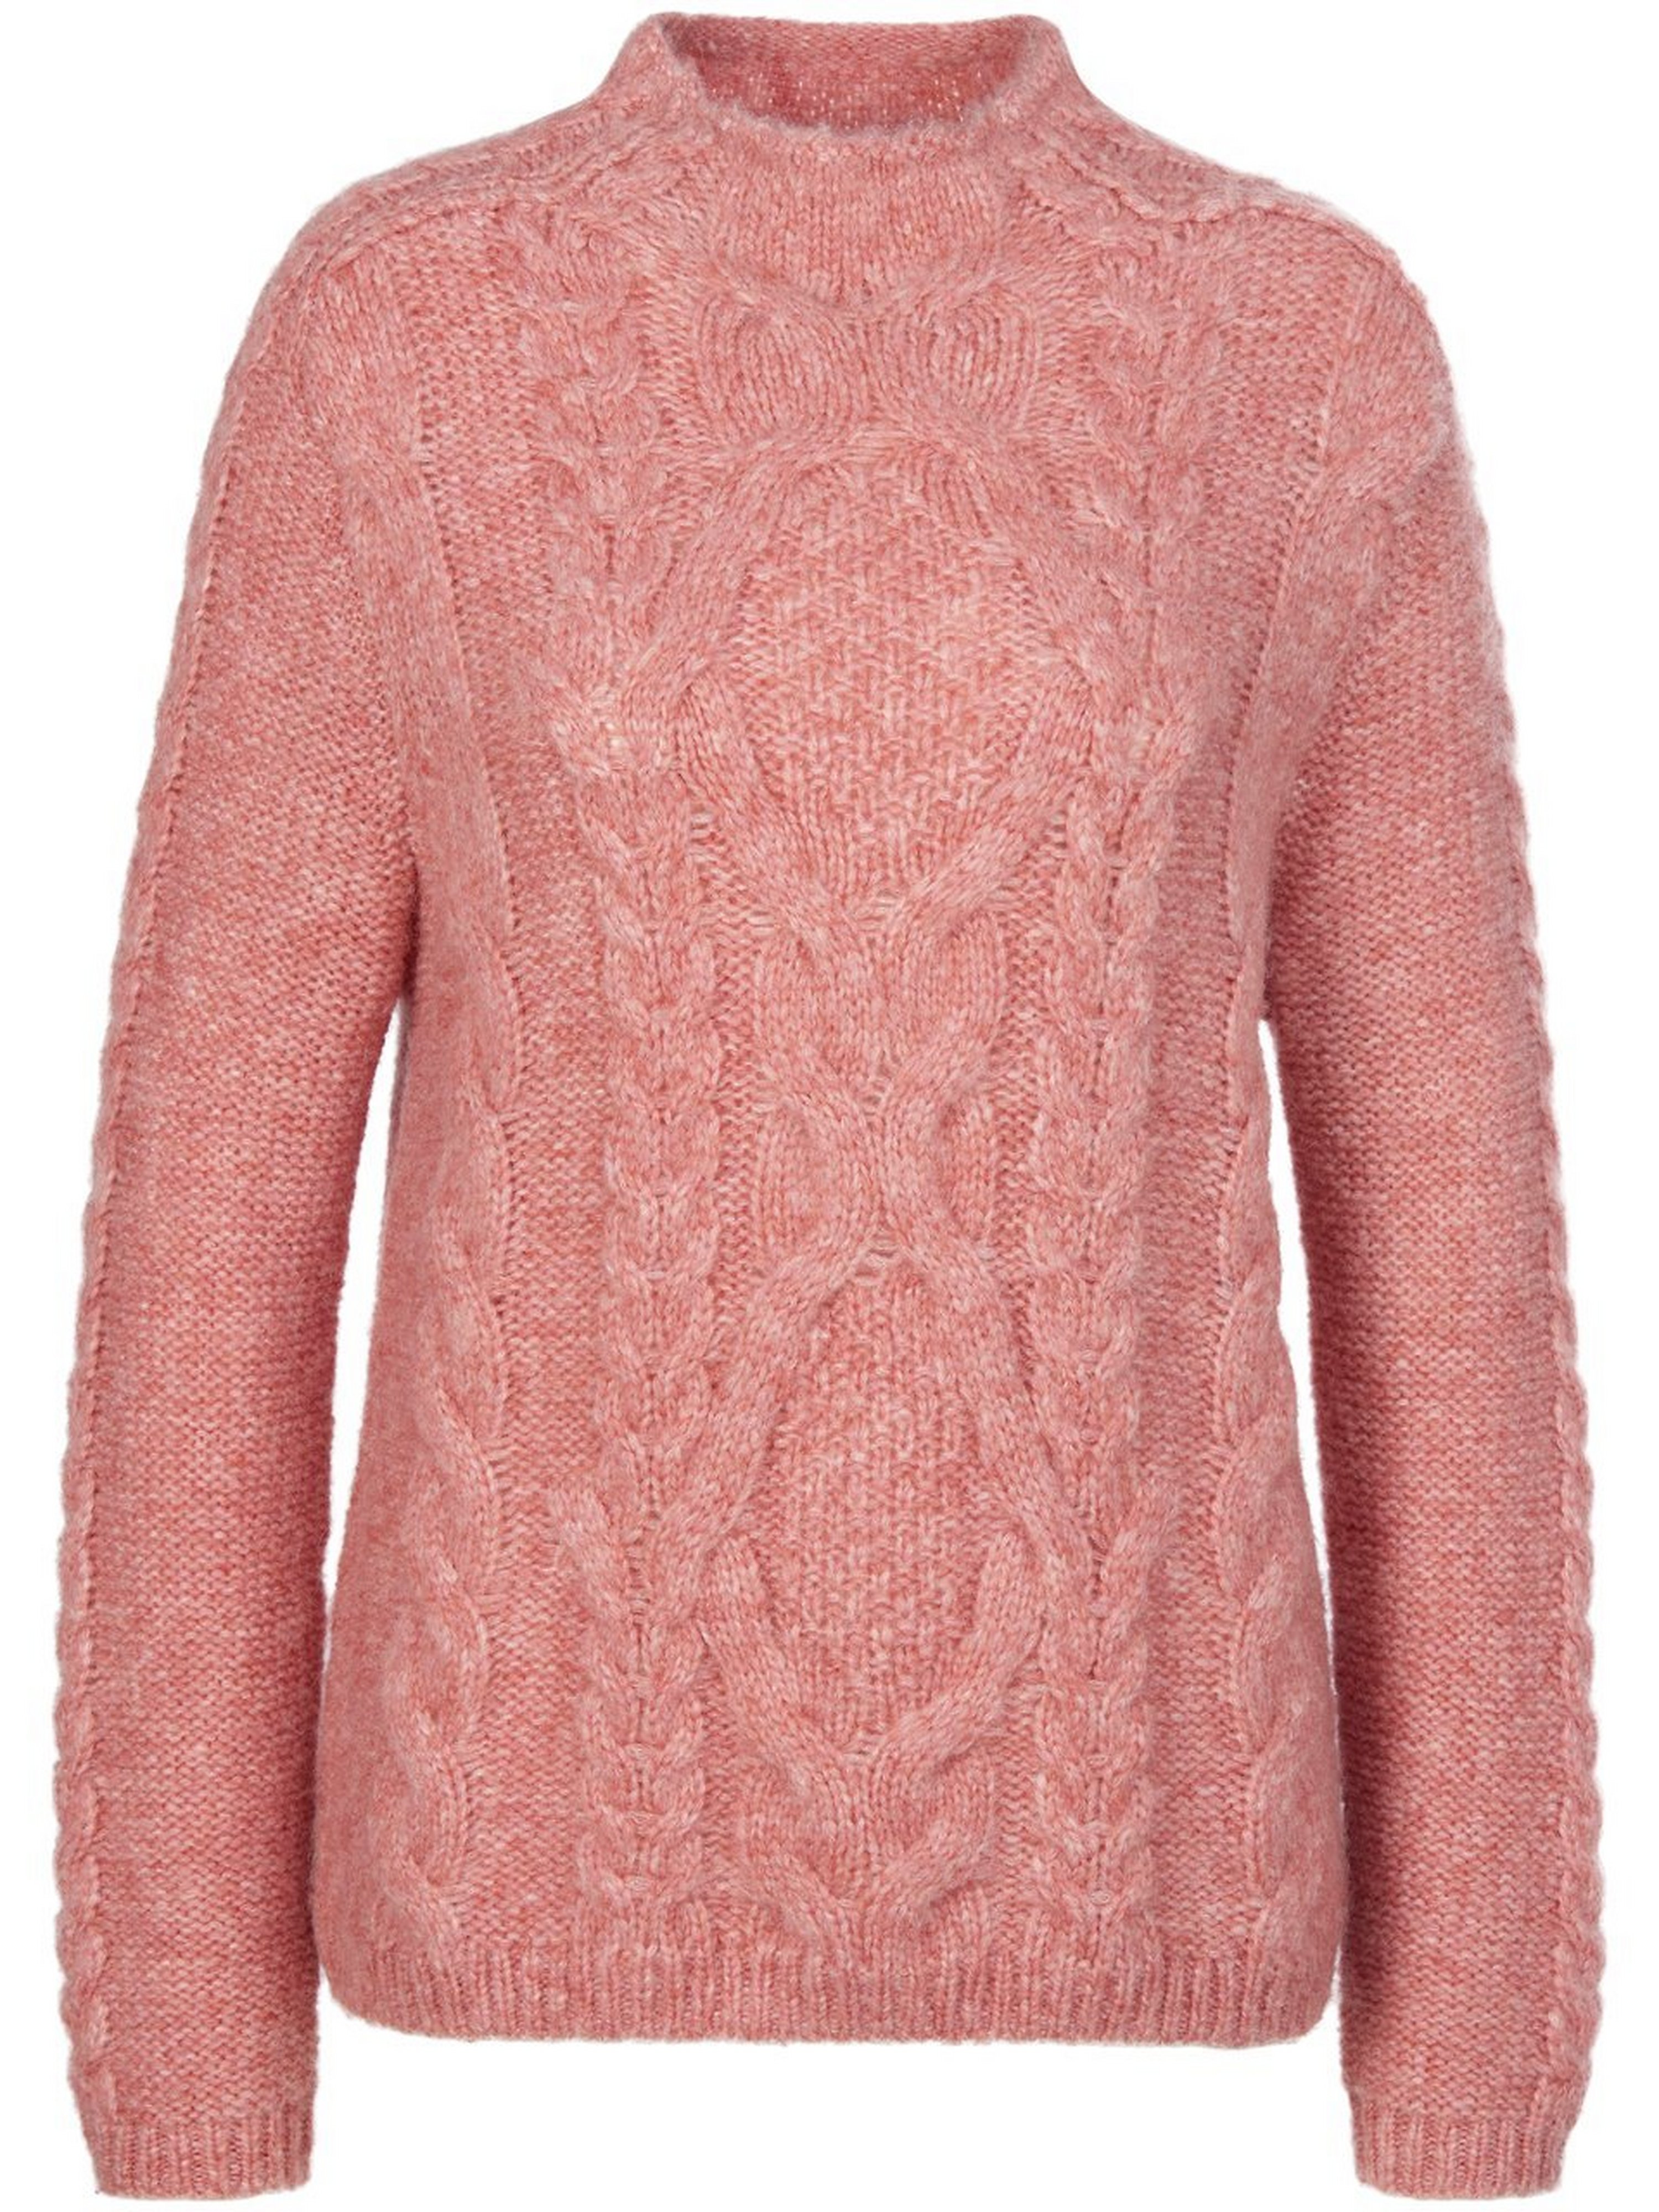 Le pull manches longues  Fadenmeister Berlin rosé taille 48